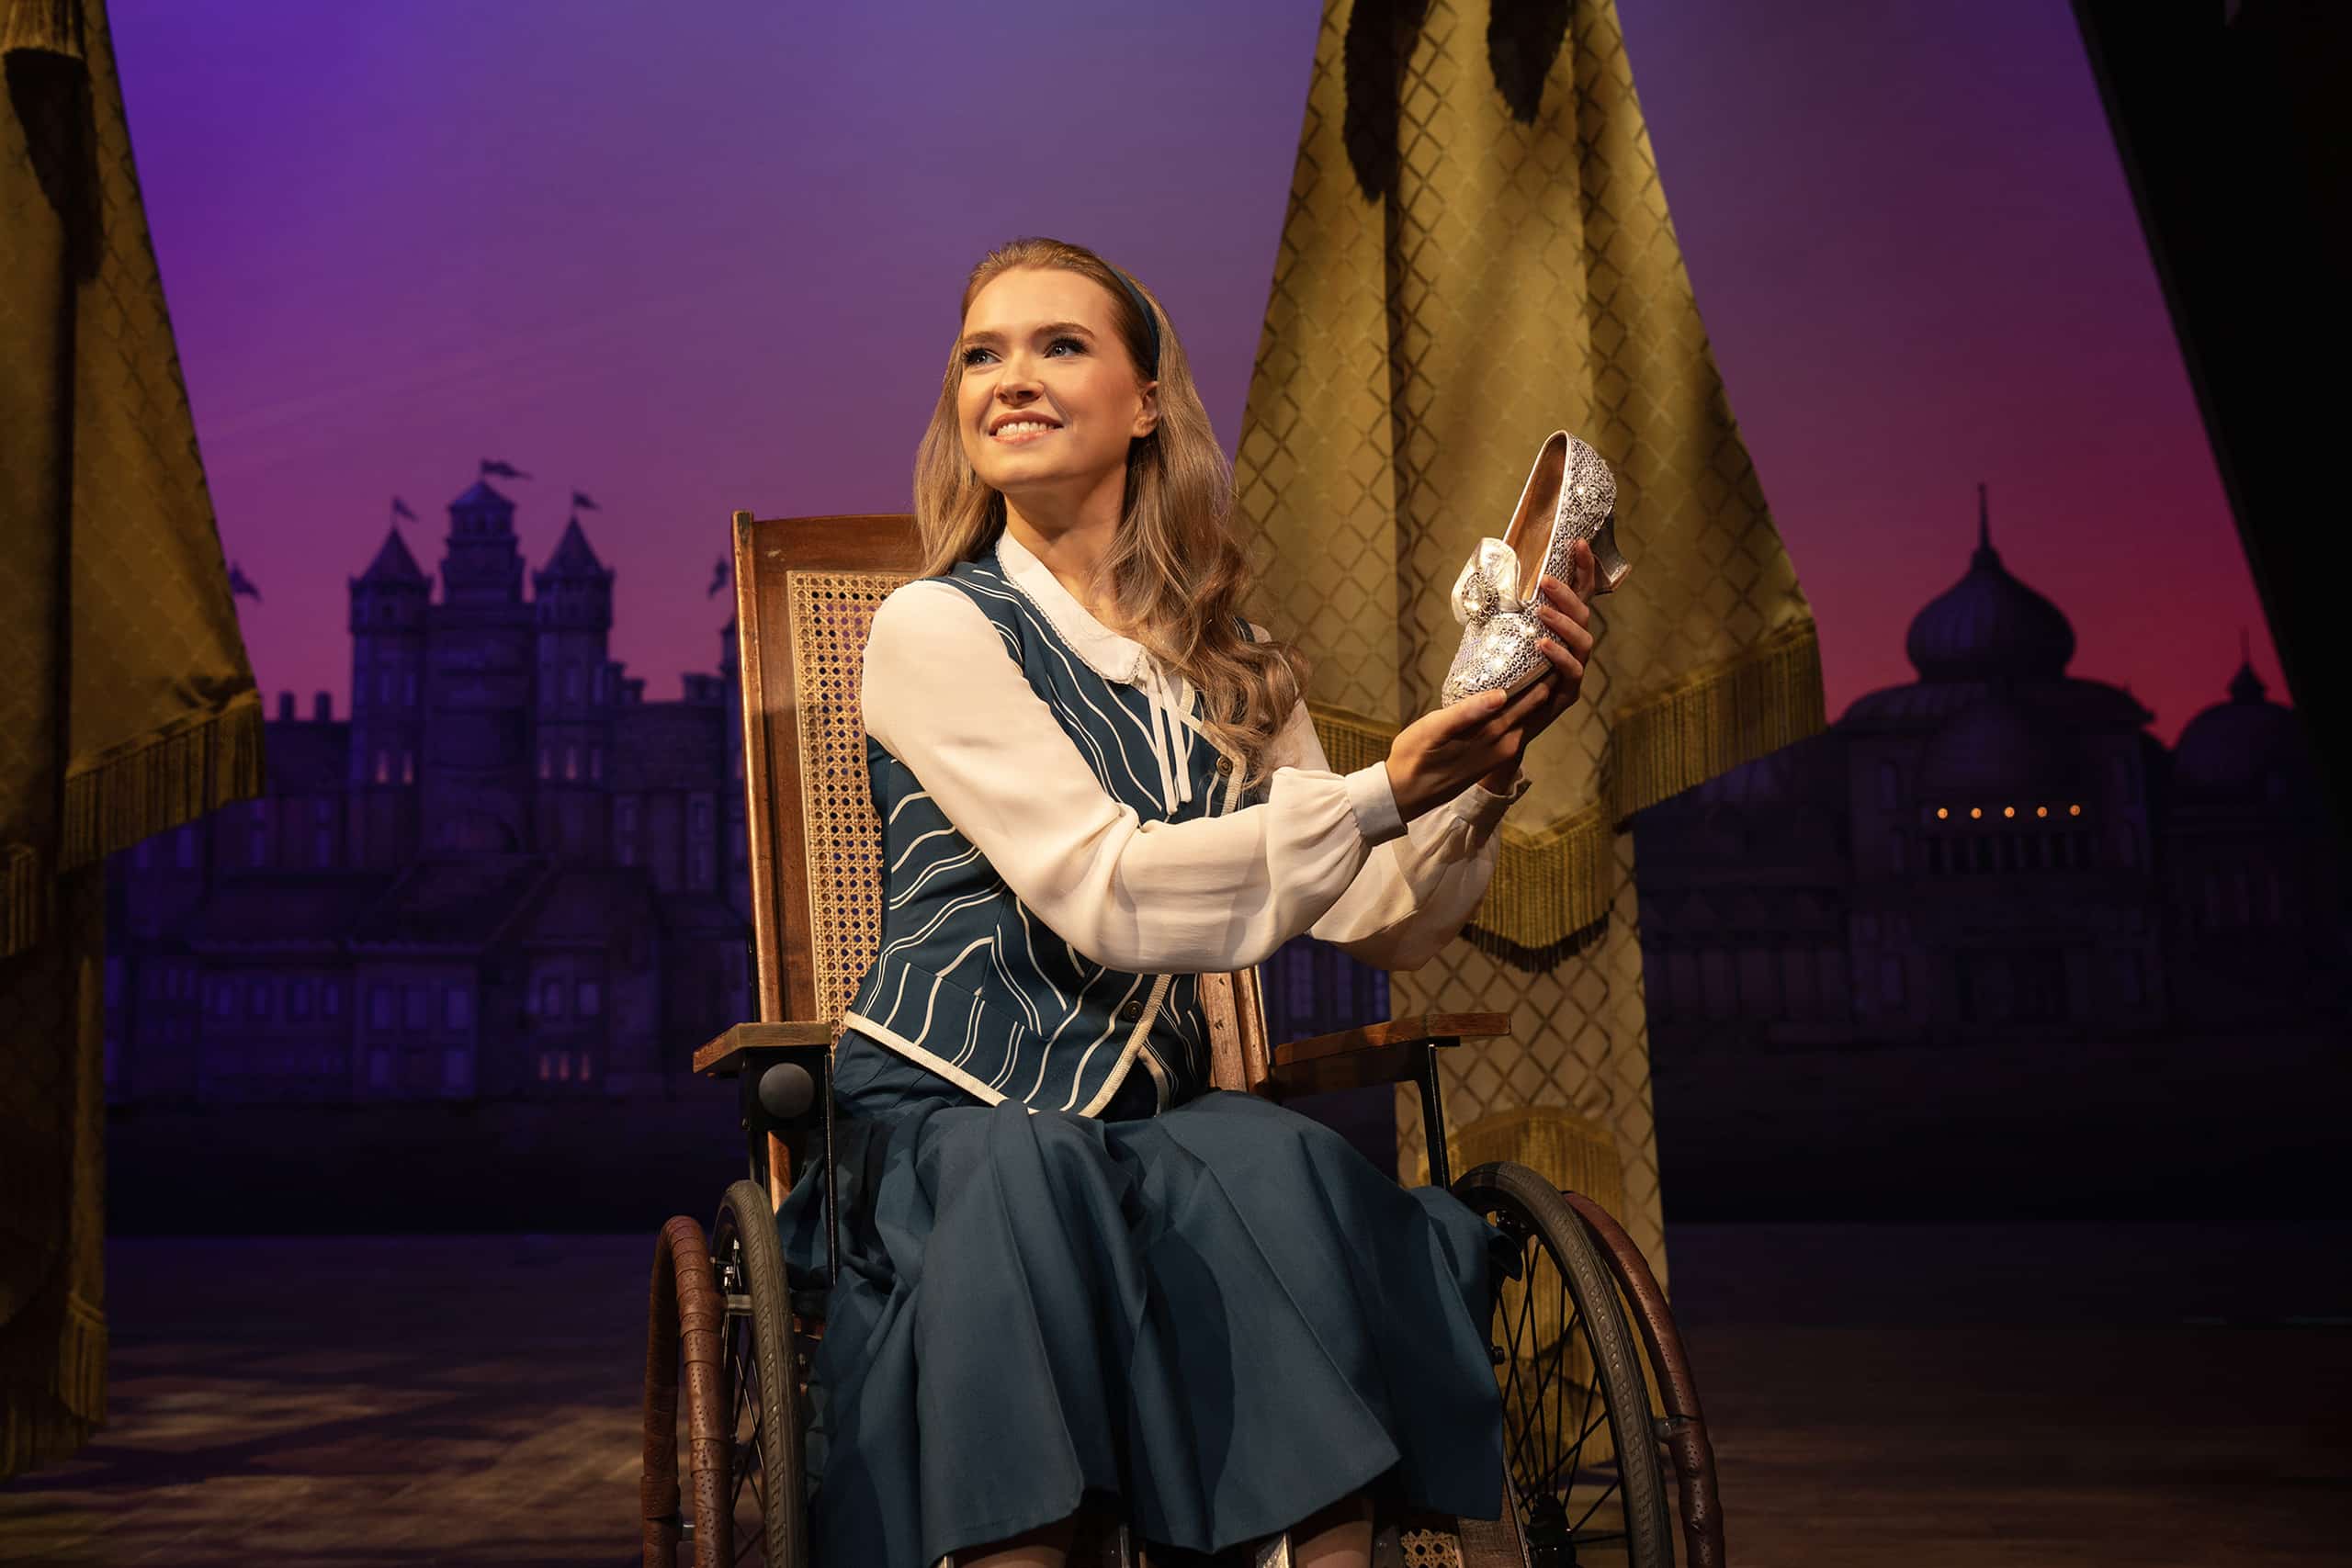 Nessarose in wheelchair holding silver sequinned shoes, smiling wearing blue striped top and skirt